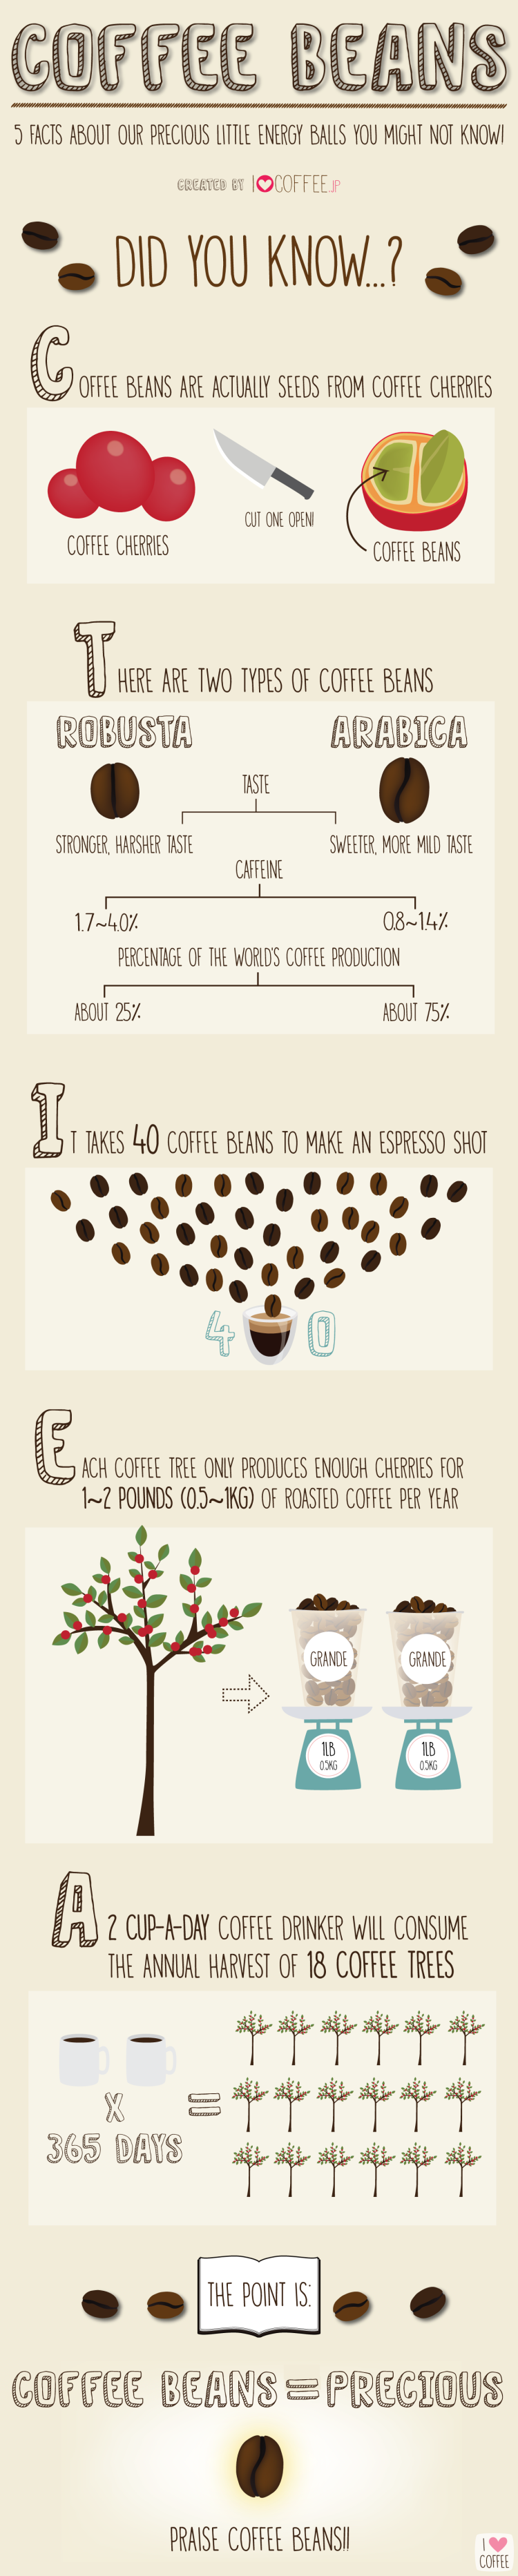 5 Facts About Coffee Beans [Infographic]